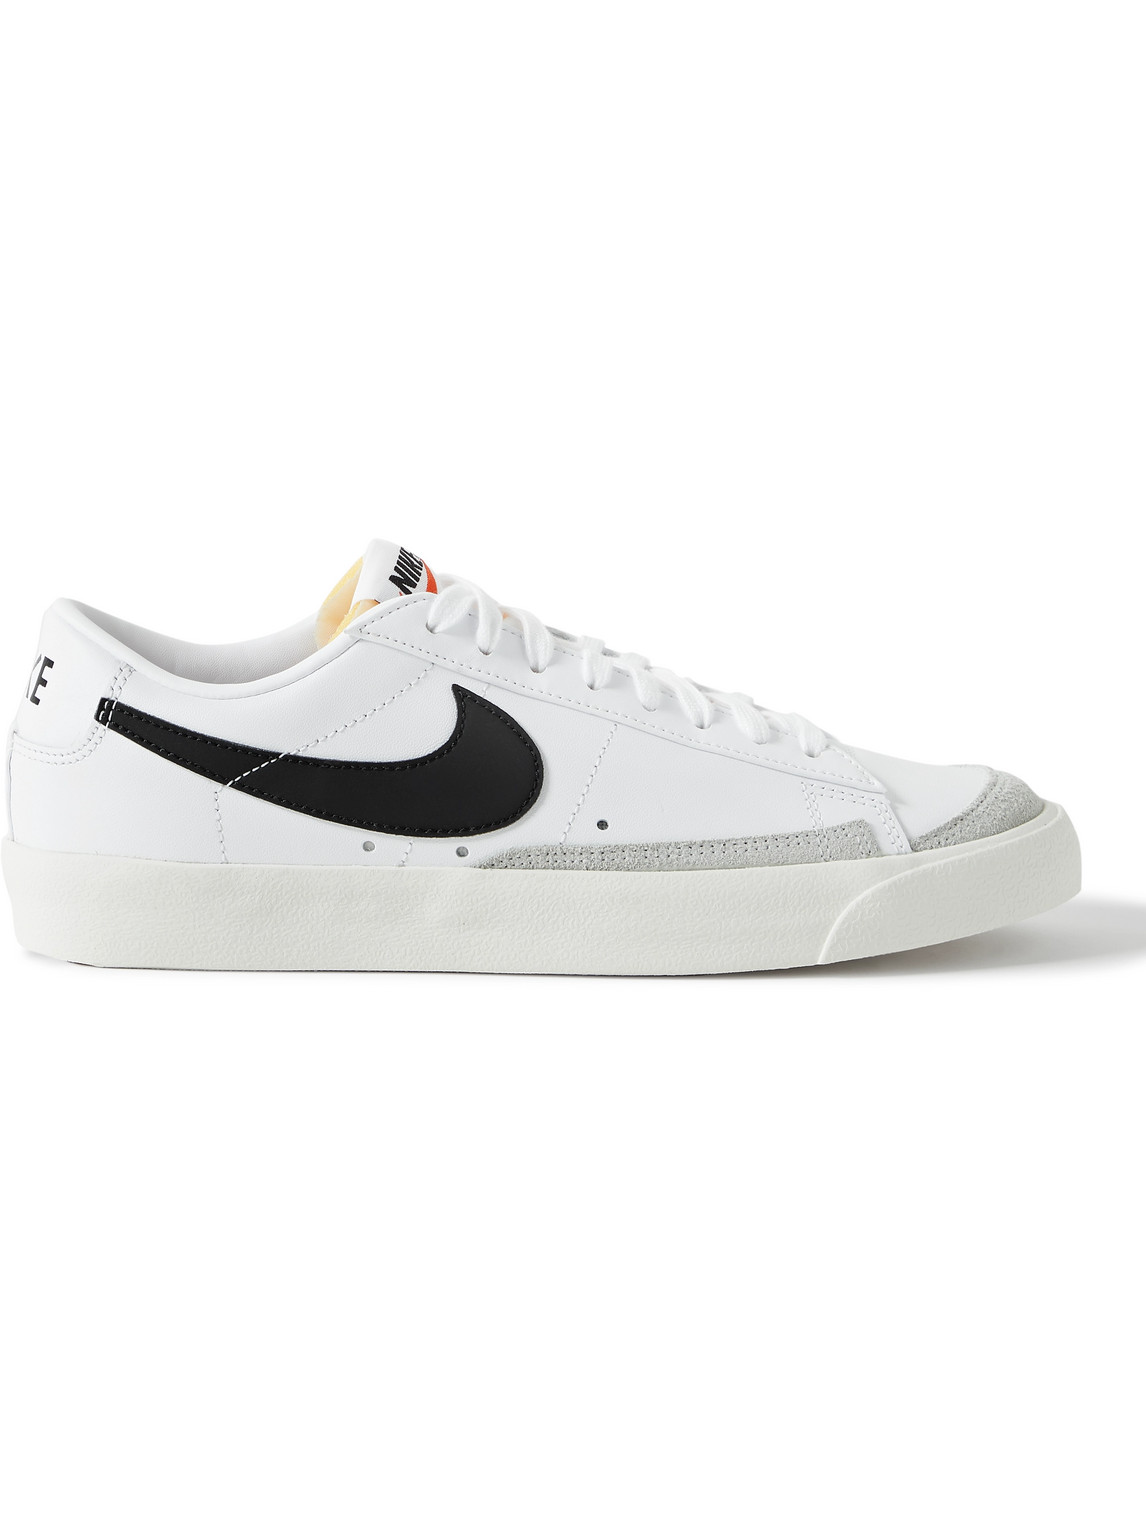 Blazer Low '77 Suede-Trimmed Leather Sneakers